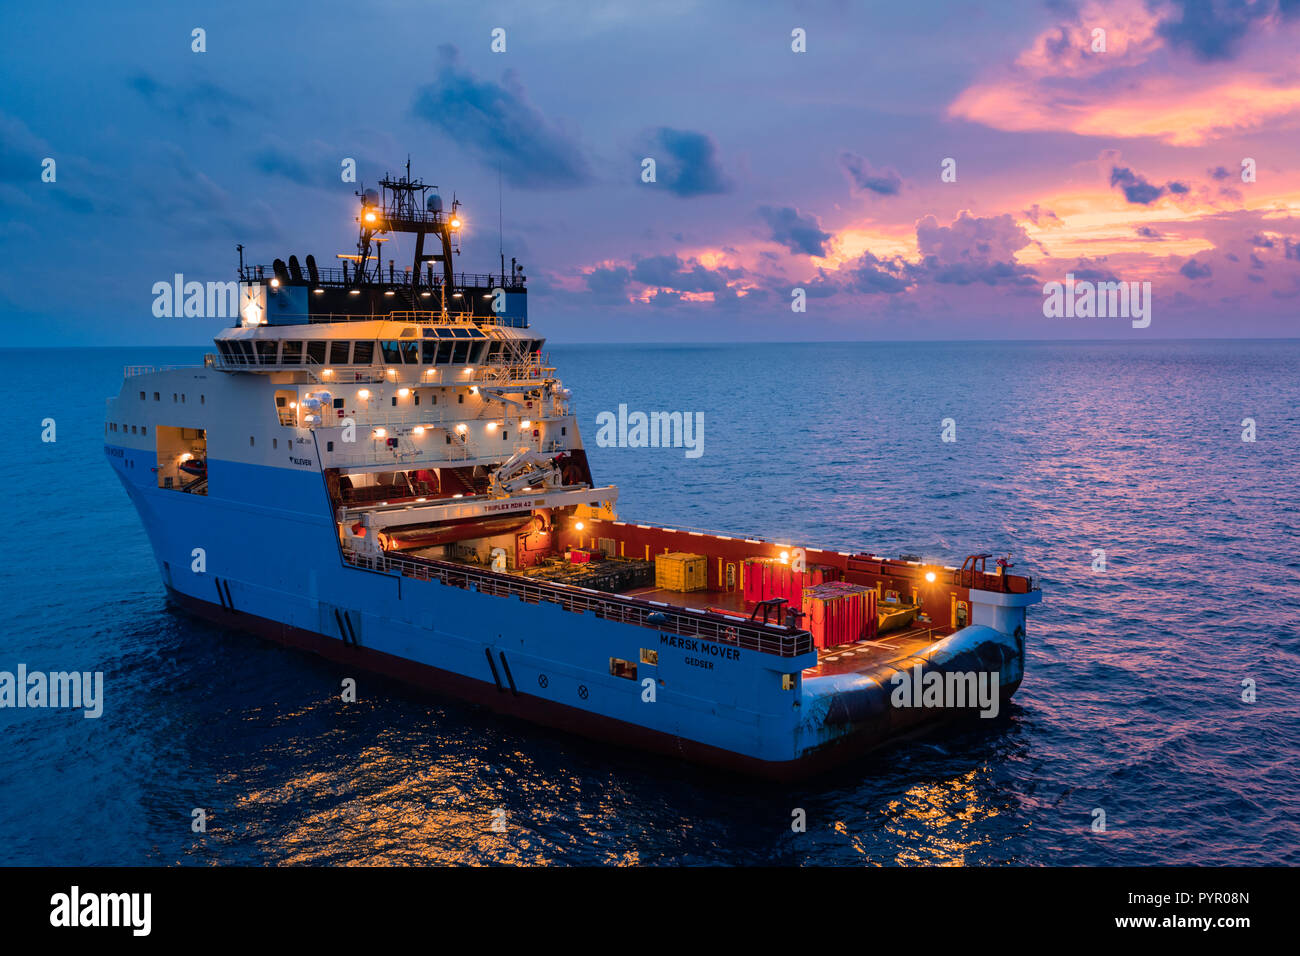 Maersk Drilling High Resolution Stock Photography and Images - Alamy